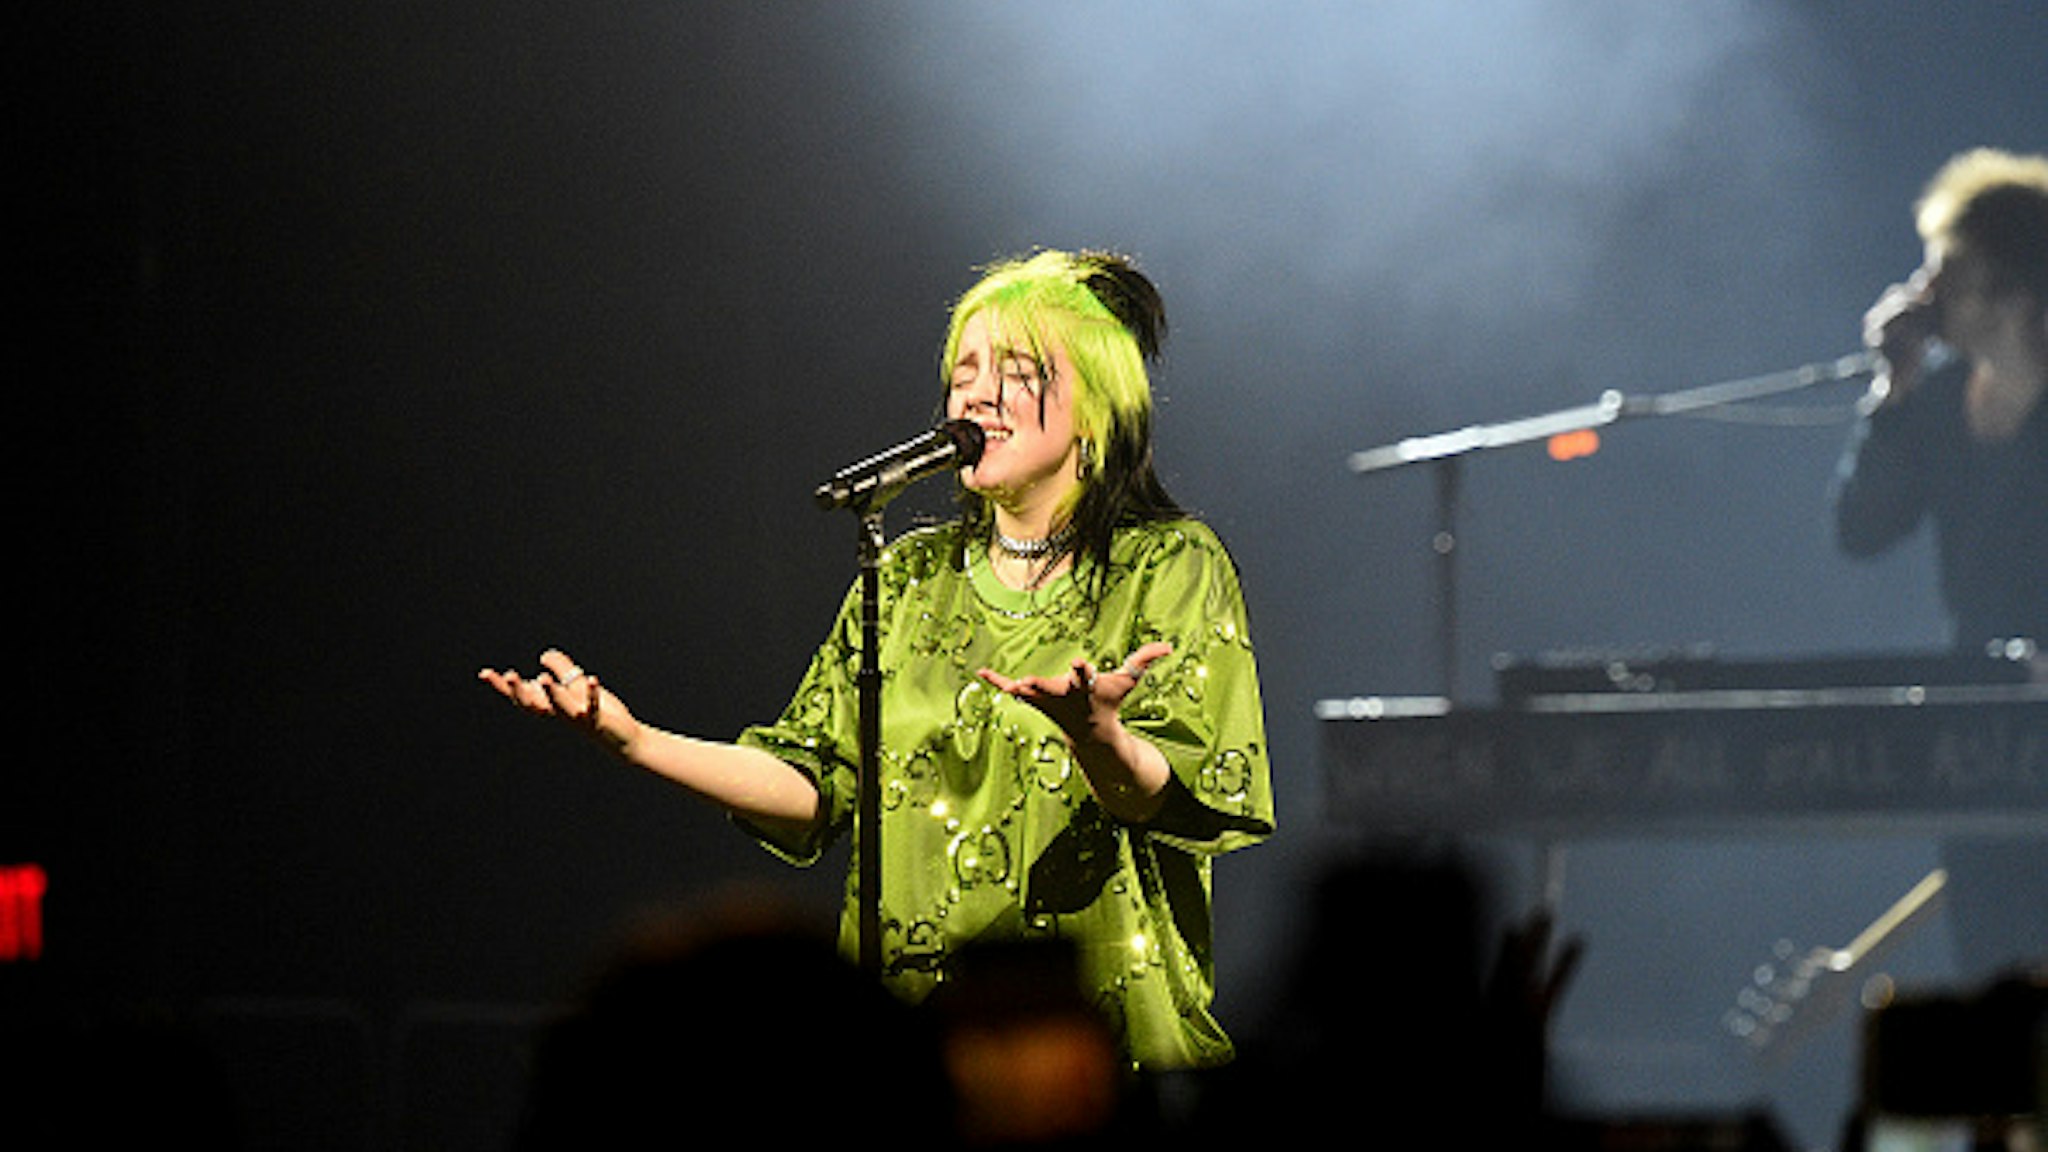 MIAMI, FLORIDA - MARCH 09: Billie Eilish performs live on stage at Billie Eilish "Where Do We Go?" World Tour Kick Off - Miami at American Airlines Arena on March 09, 2020 in Miami, Florida.